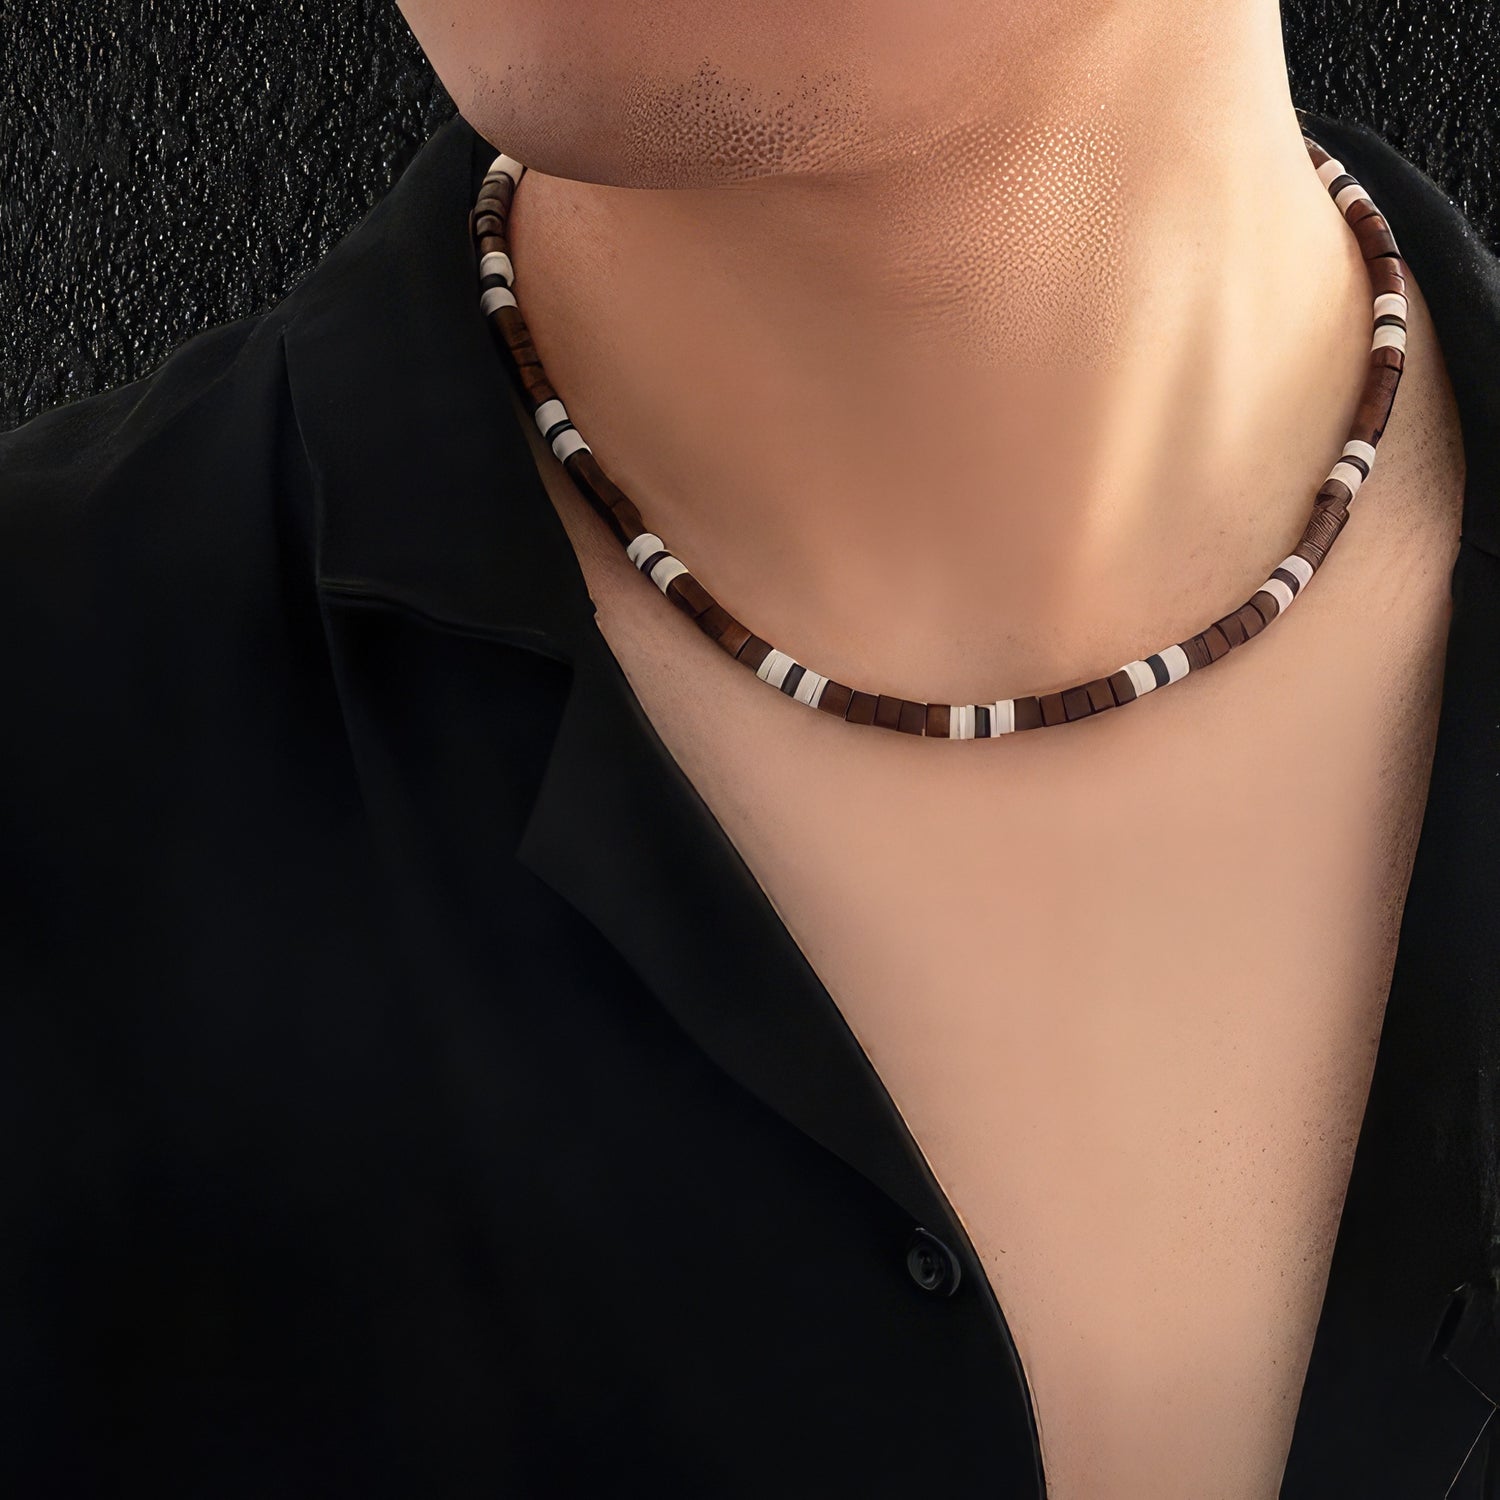 Buy Aanya Gems Lava Stone Beads Necklace, Men Necklace 8mm Choker Necklace,  Fashion Men Rock Handmade Jewelry Online In India At Discounted Prices